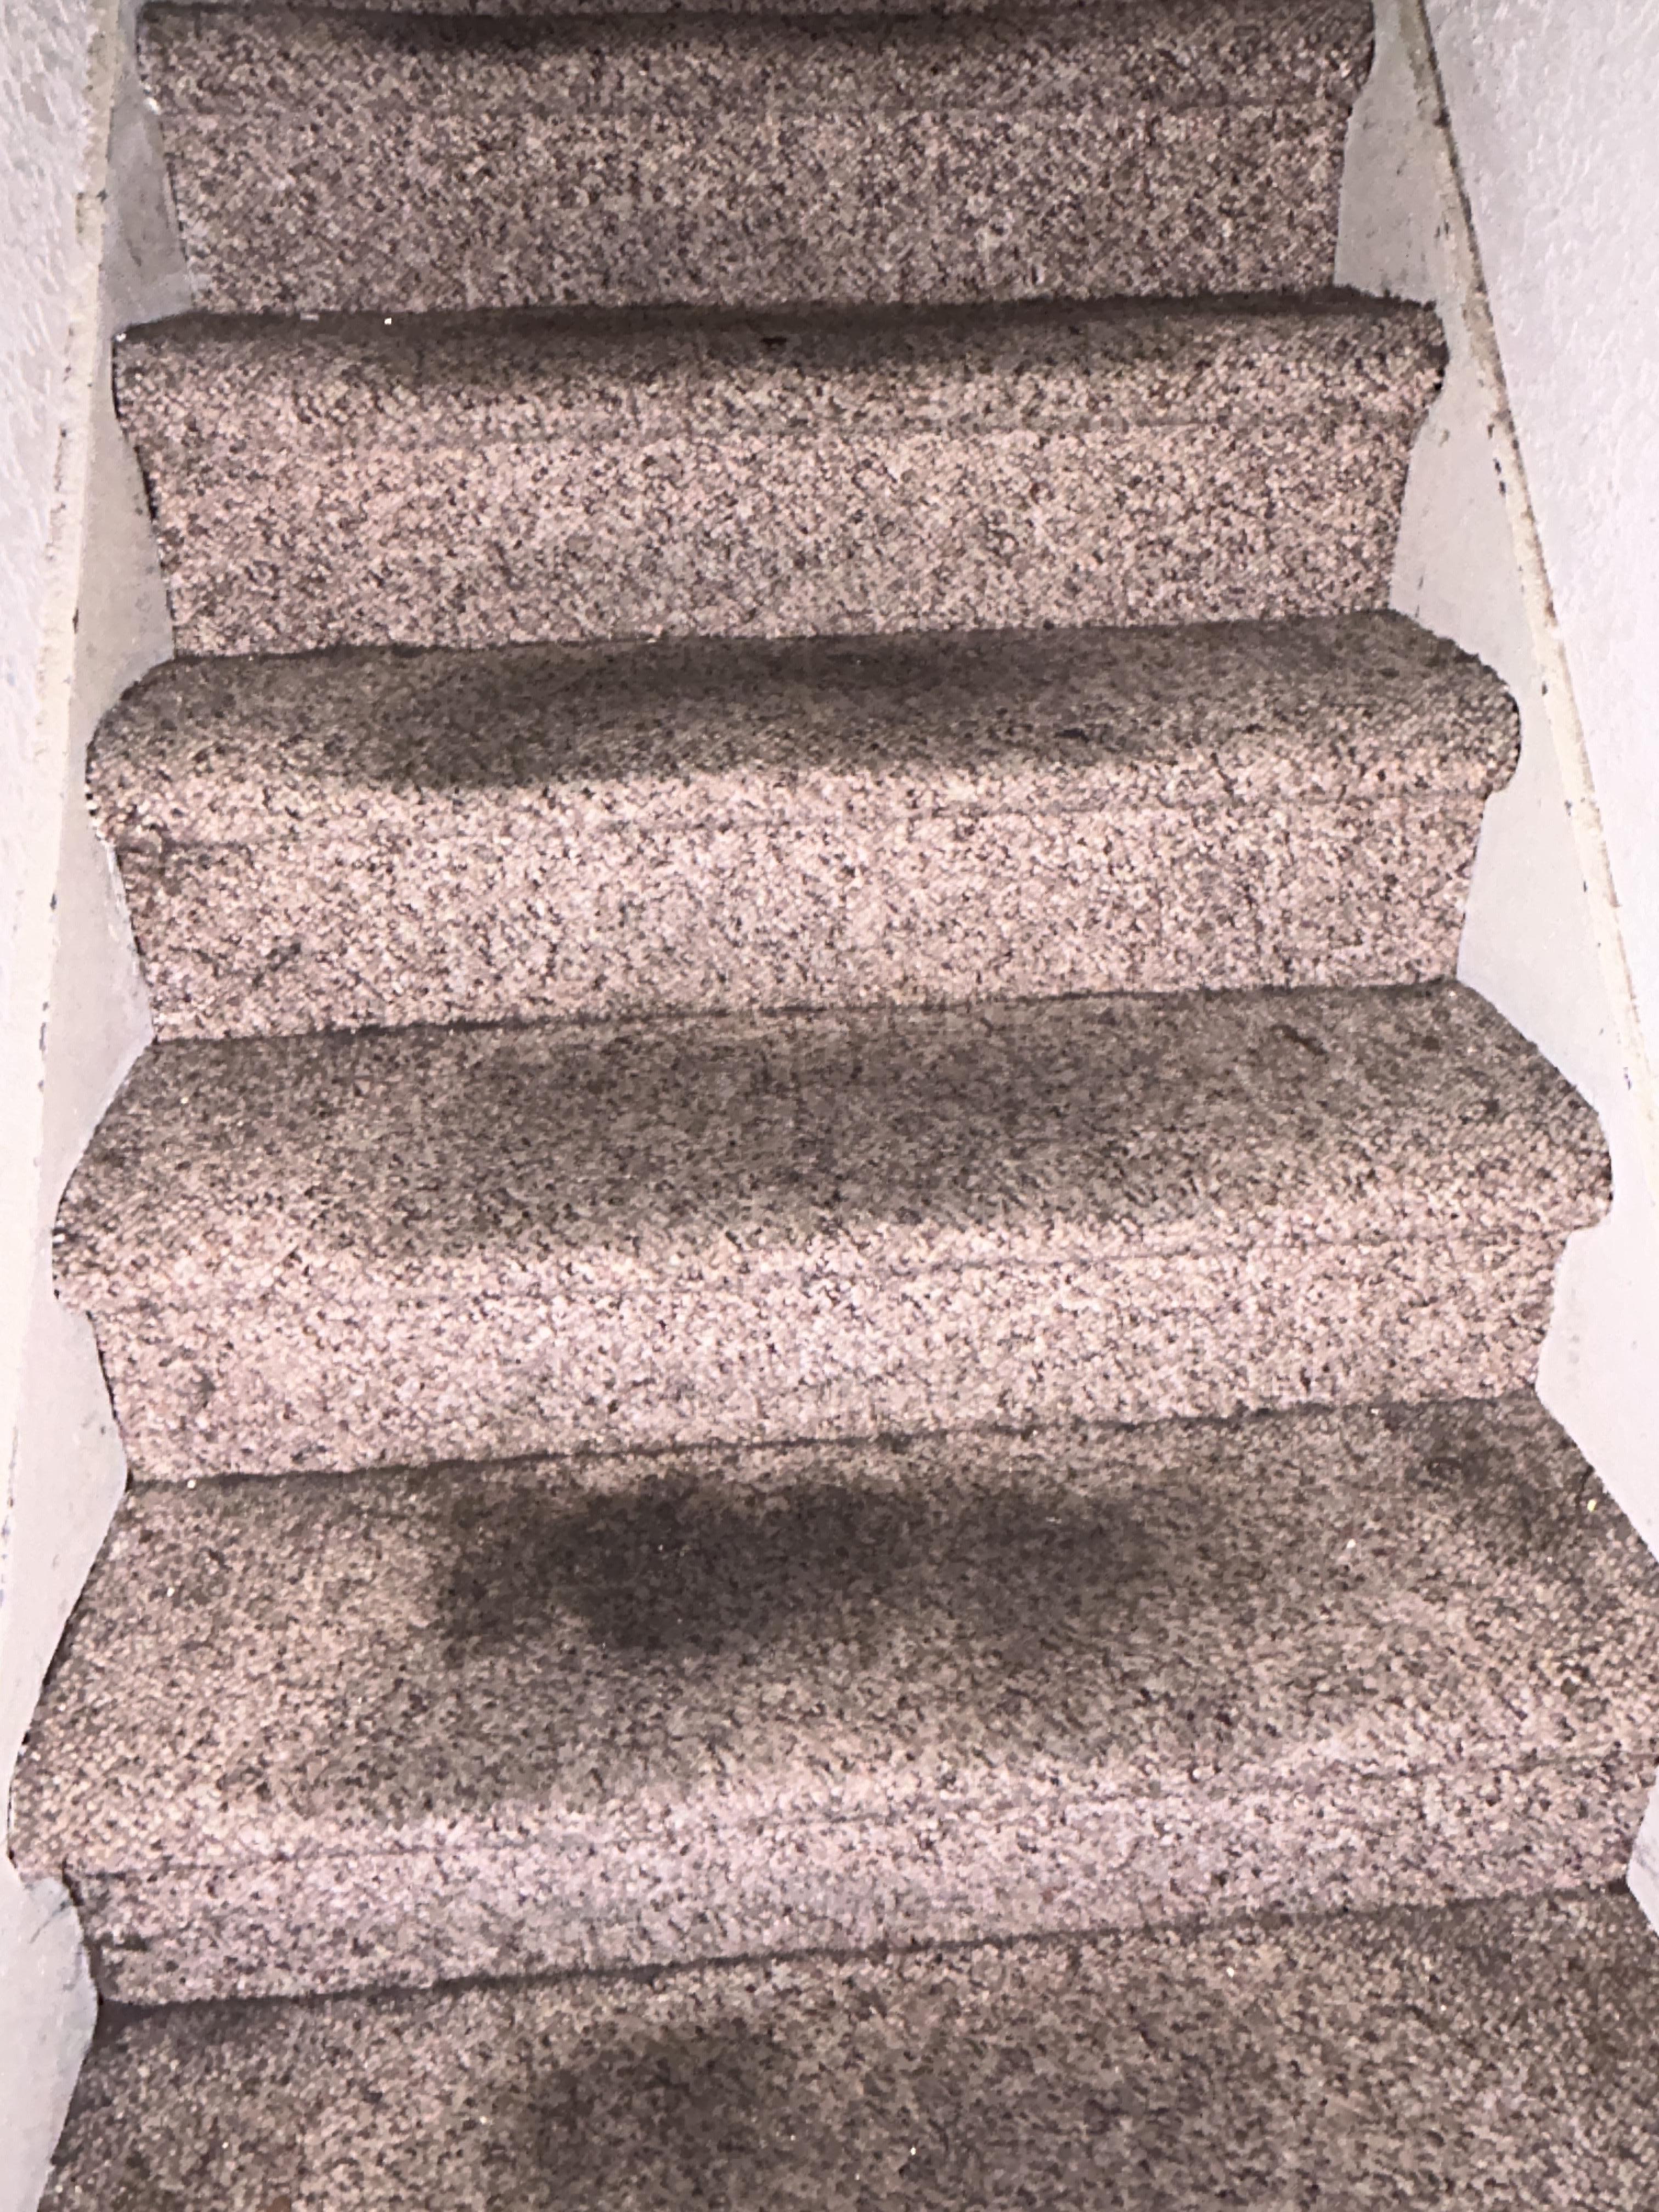 Soot on Stairs